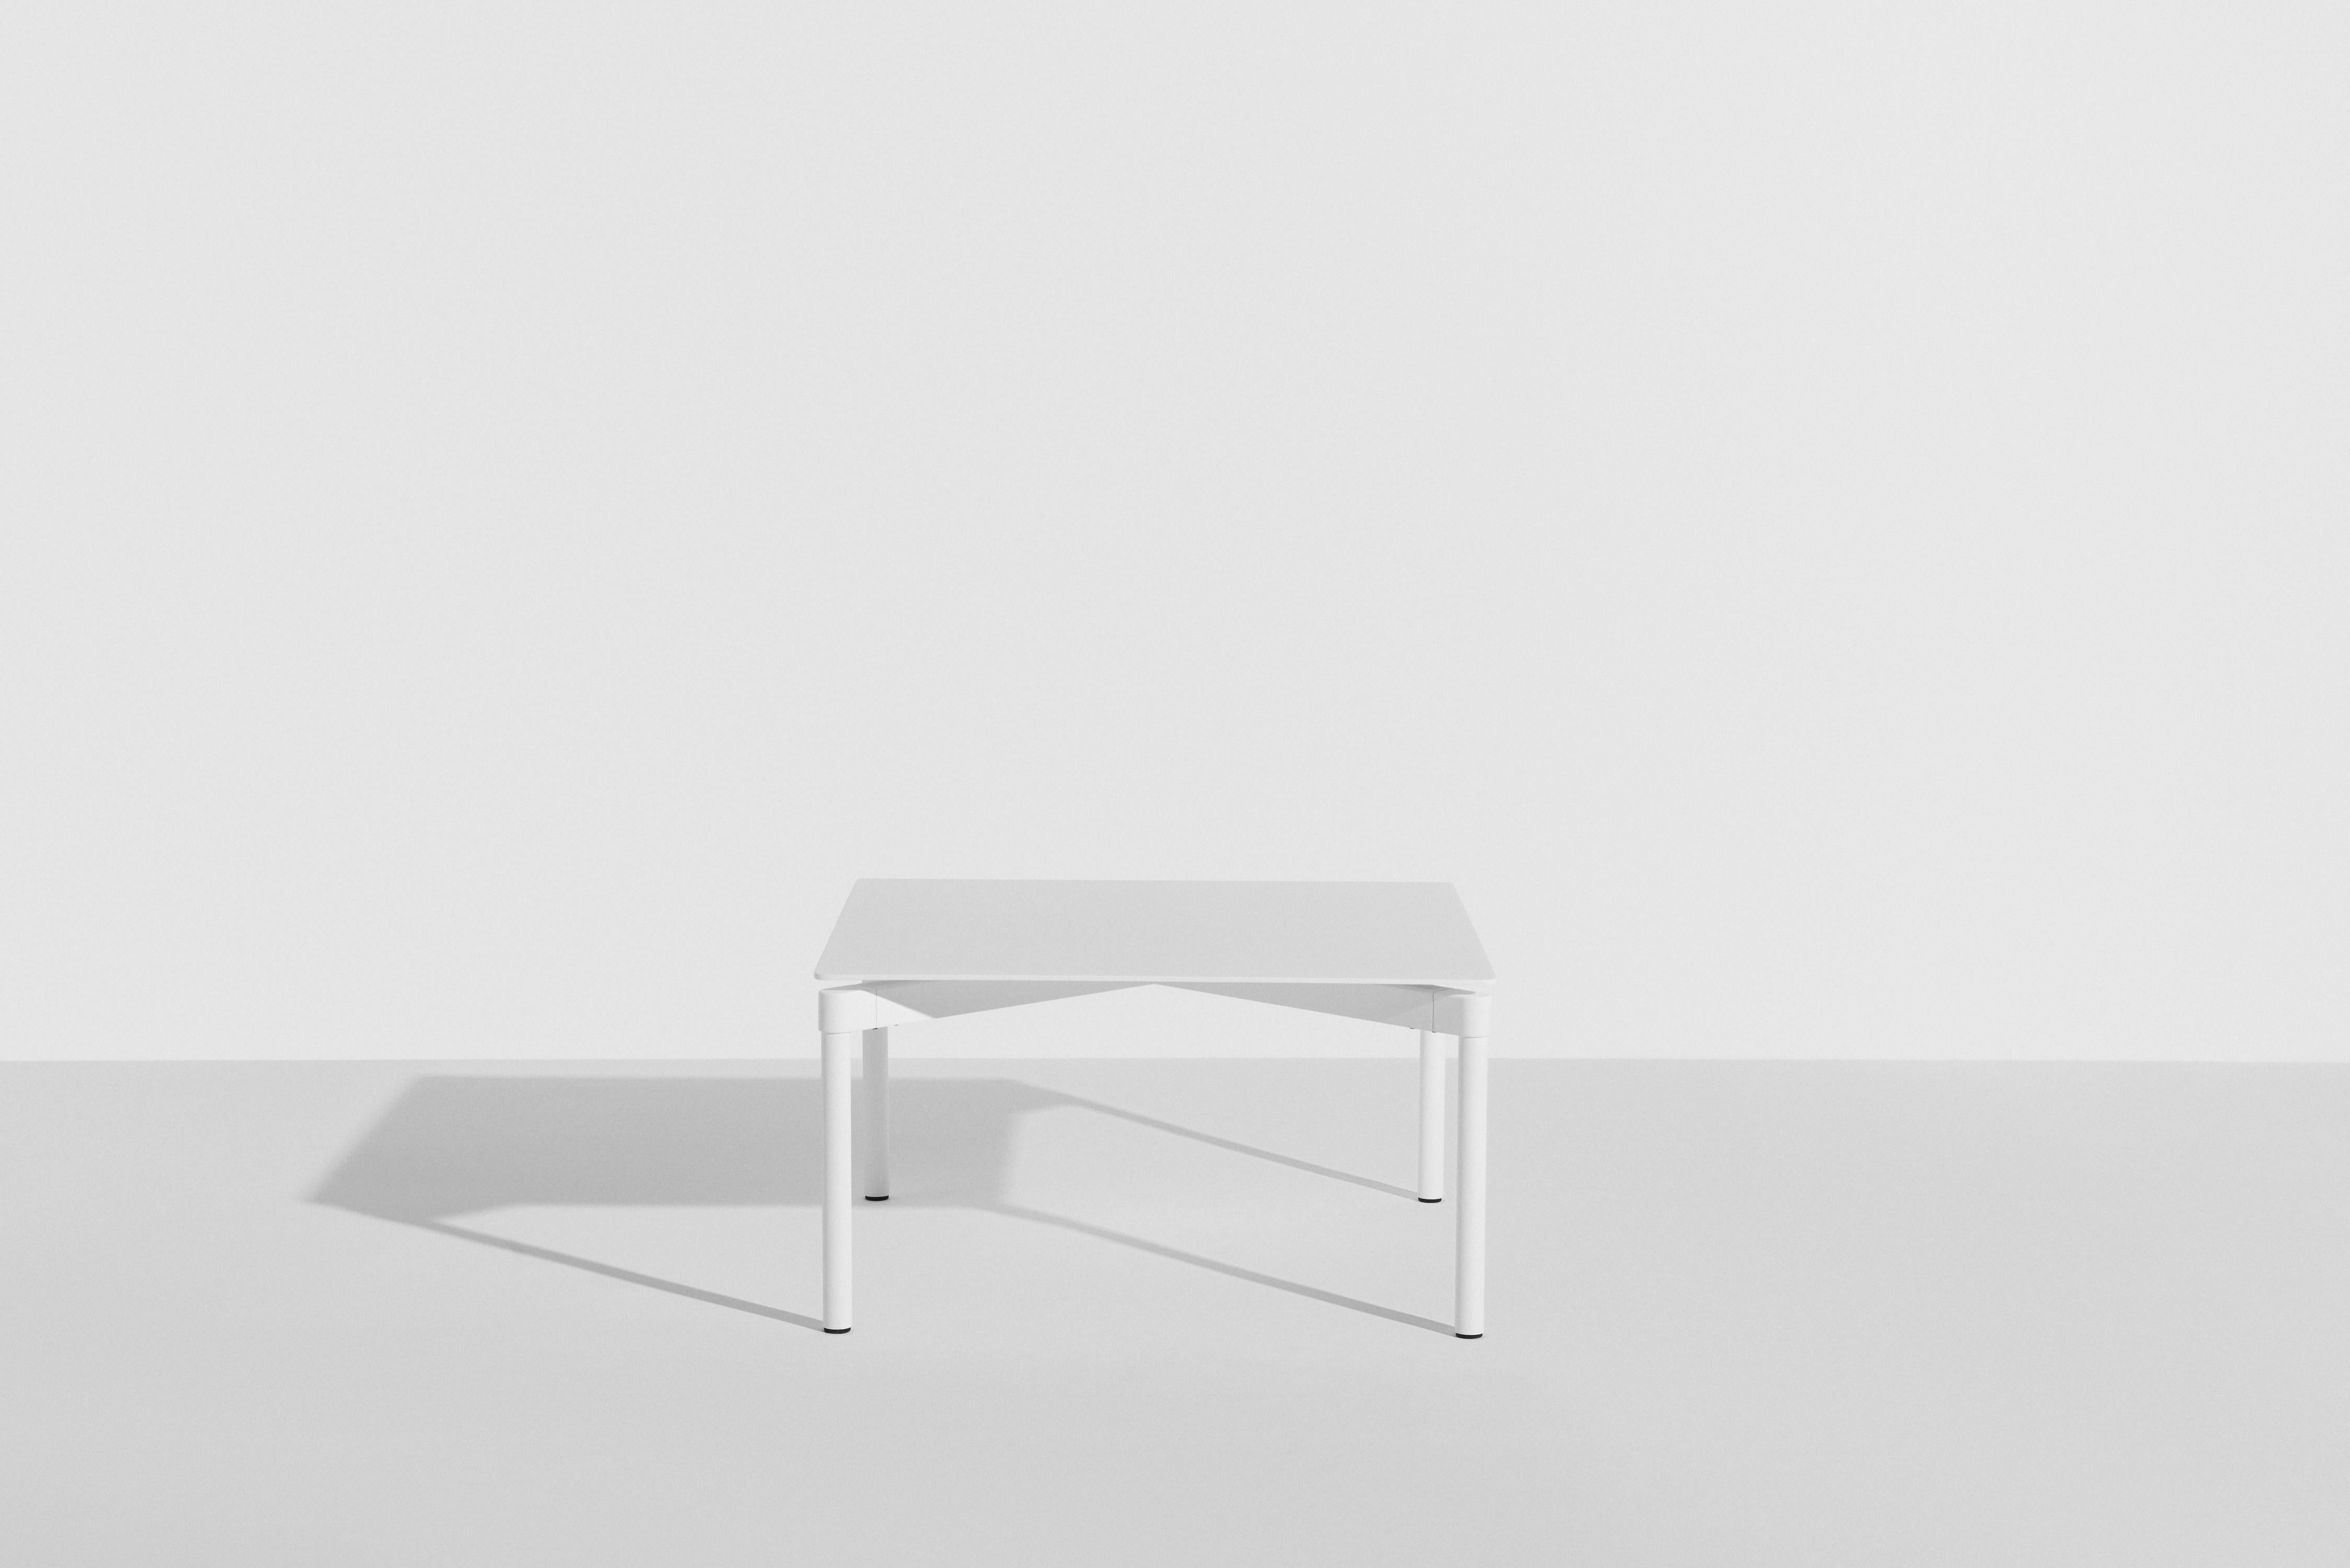 Petite Friture Fromme Coffee Table in White Aluminium by Tom Chung, 2020

The Fromme collection stands out by its pure line and compact design. Absorbers placed under the seating gives a soft and very comfortable flexibility to seats. Made from